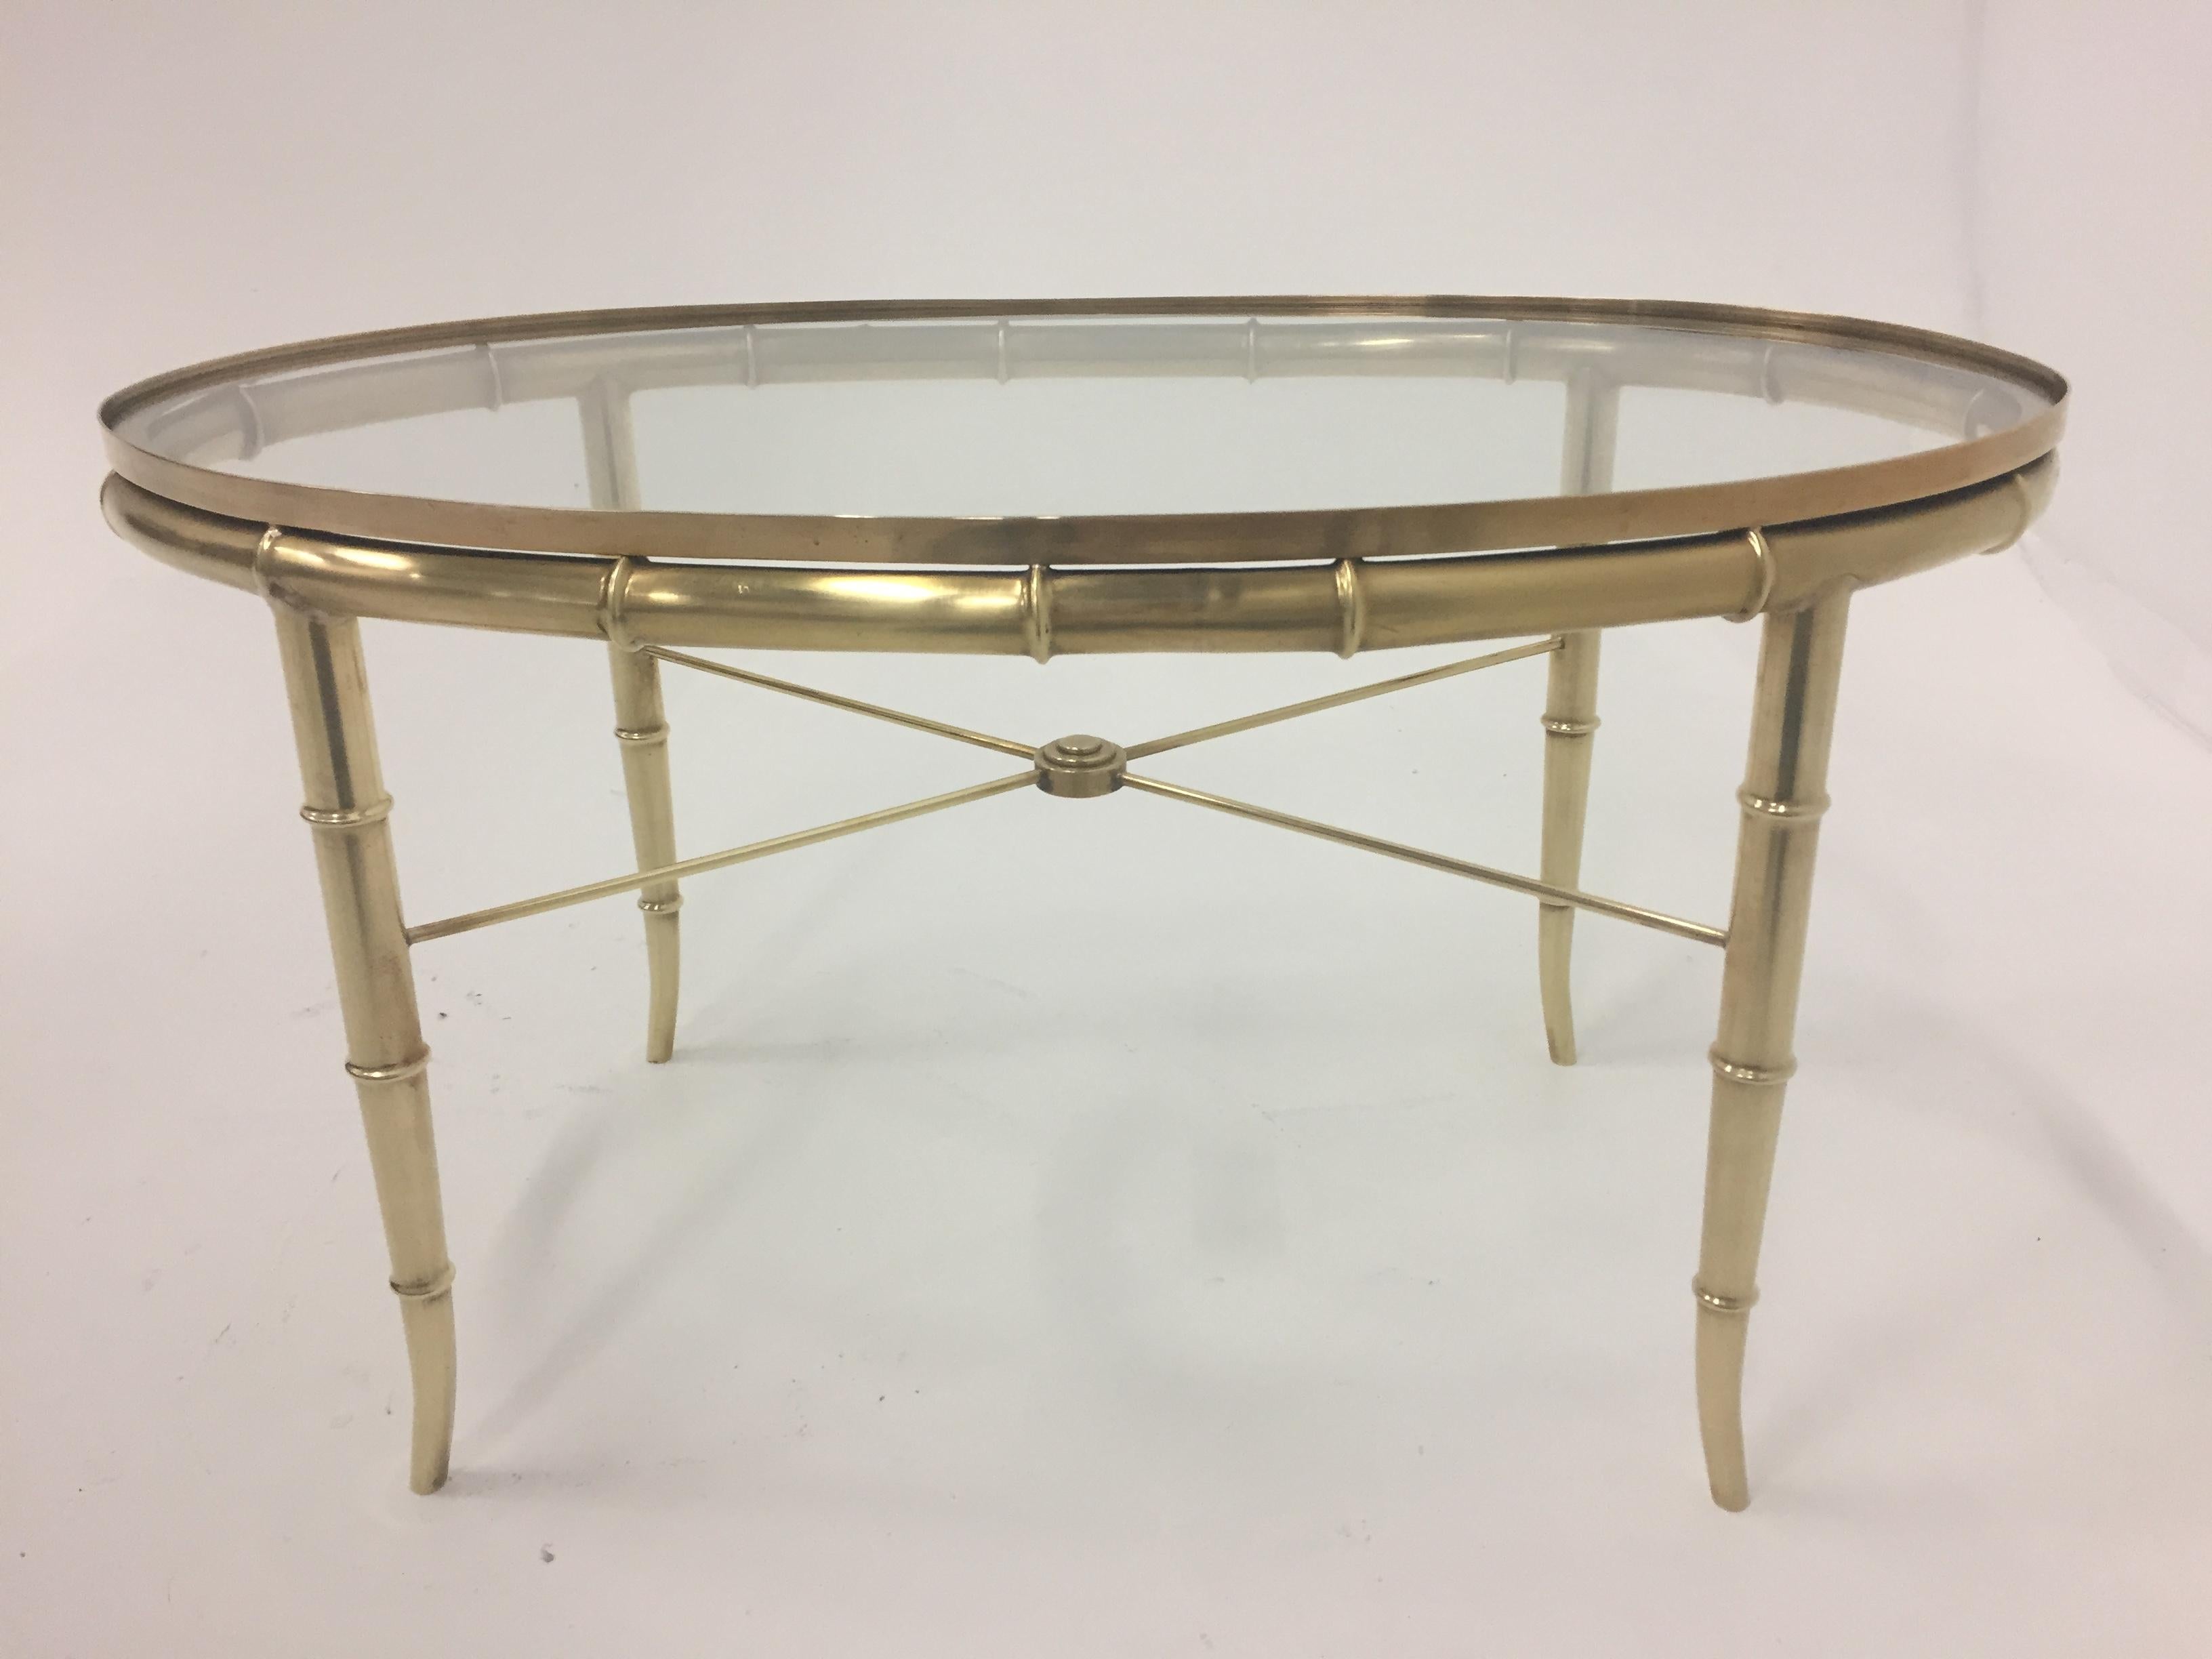 American Sophisticated Brass Faux Bamboo Oval Cocktail Table by Mastercraft